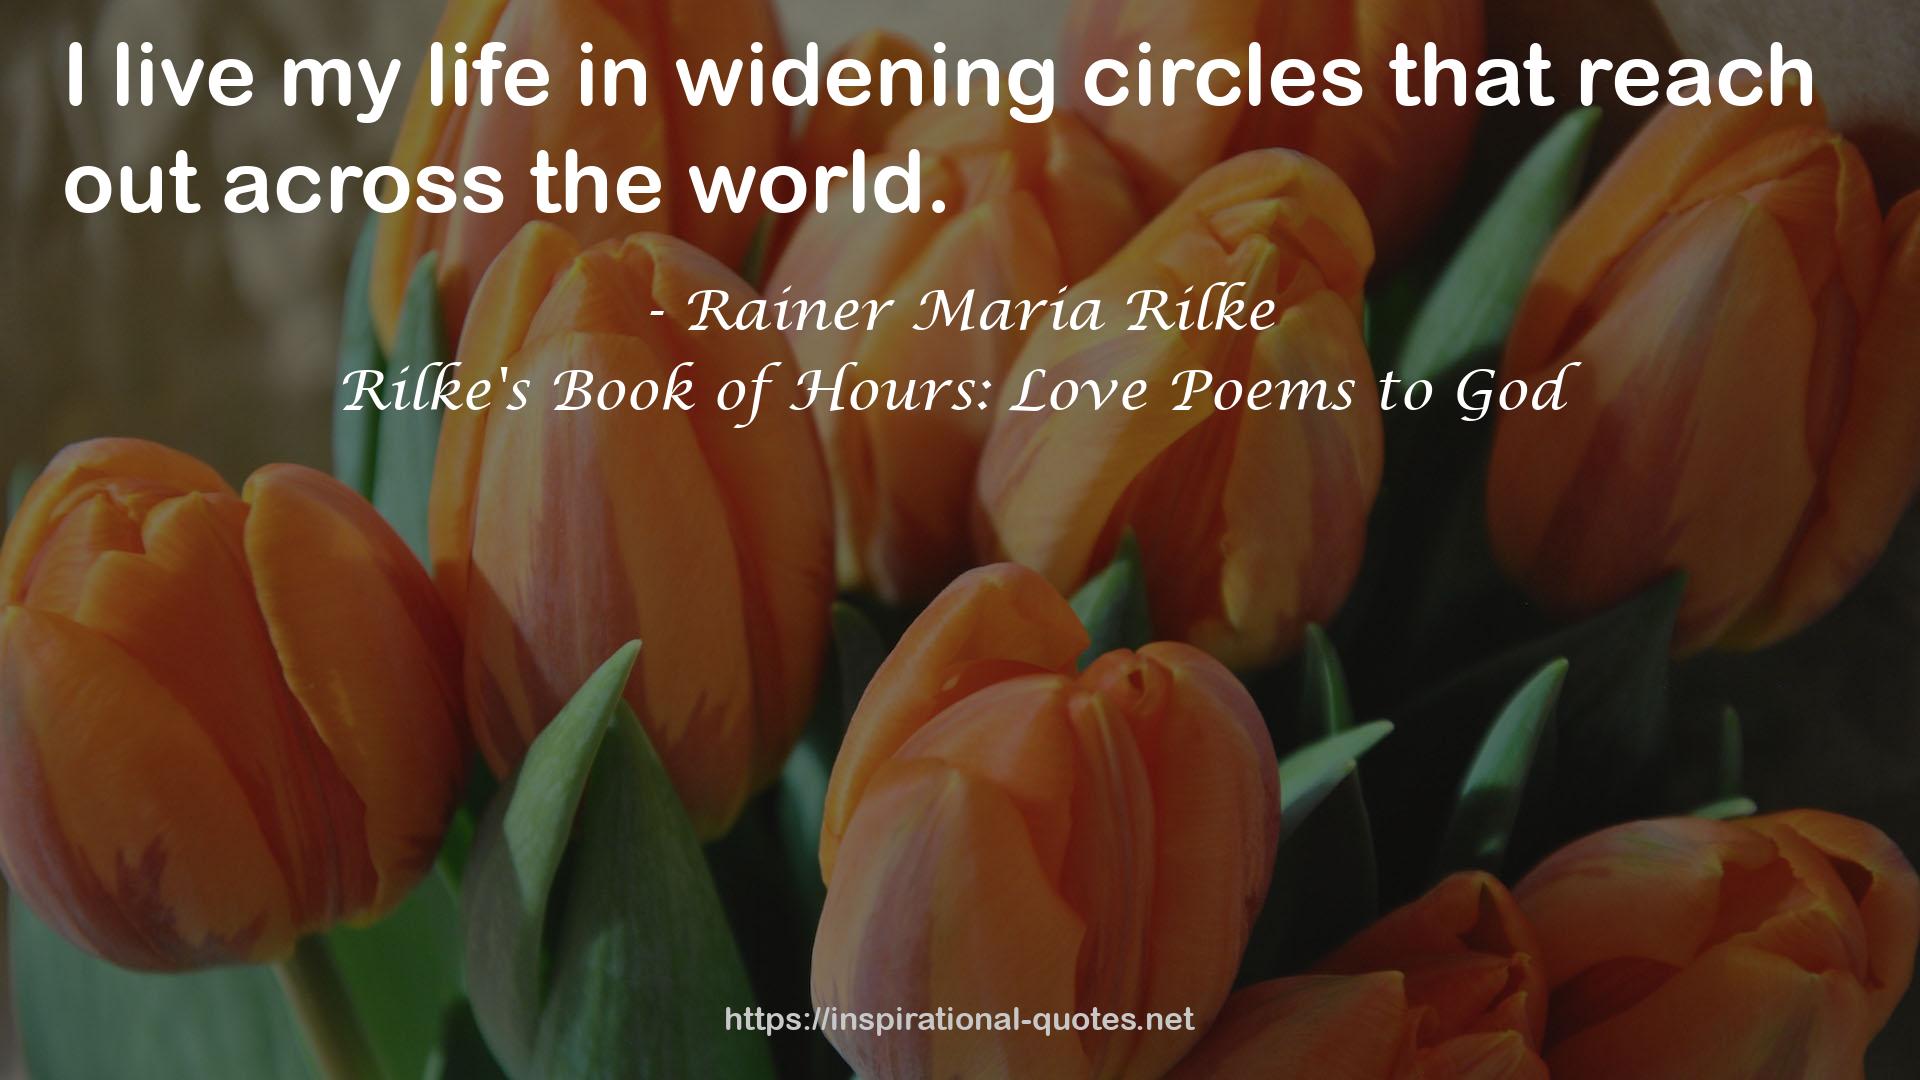 Rilke's Book of Hours: Love Poems to God QUOTES